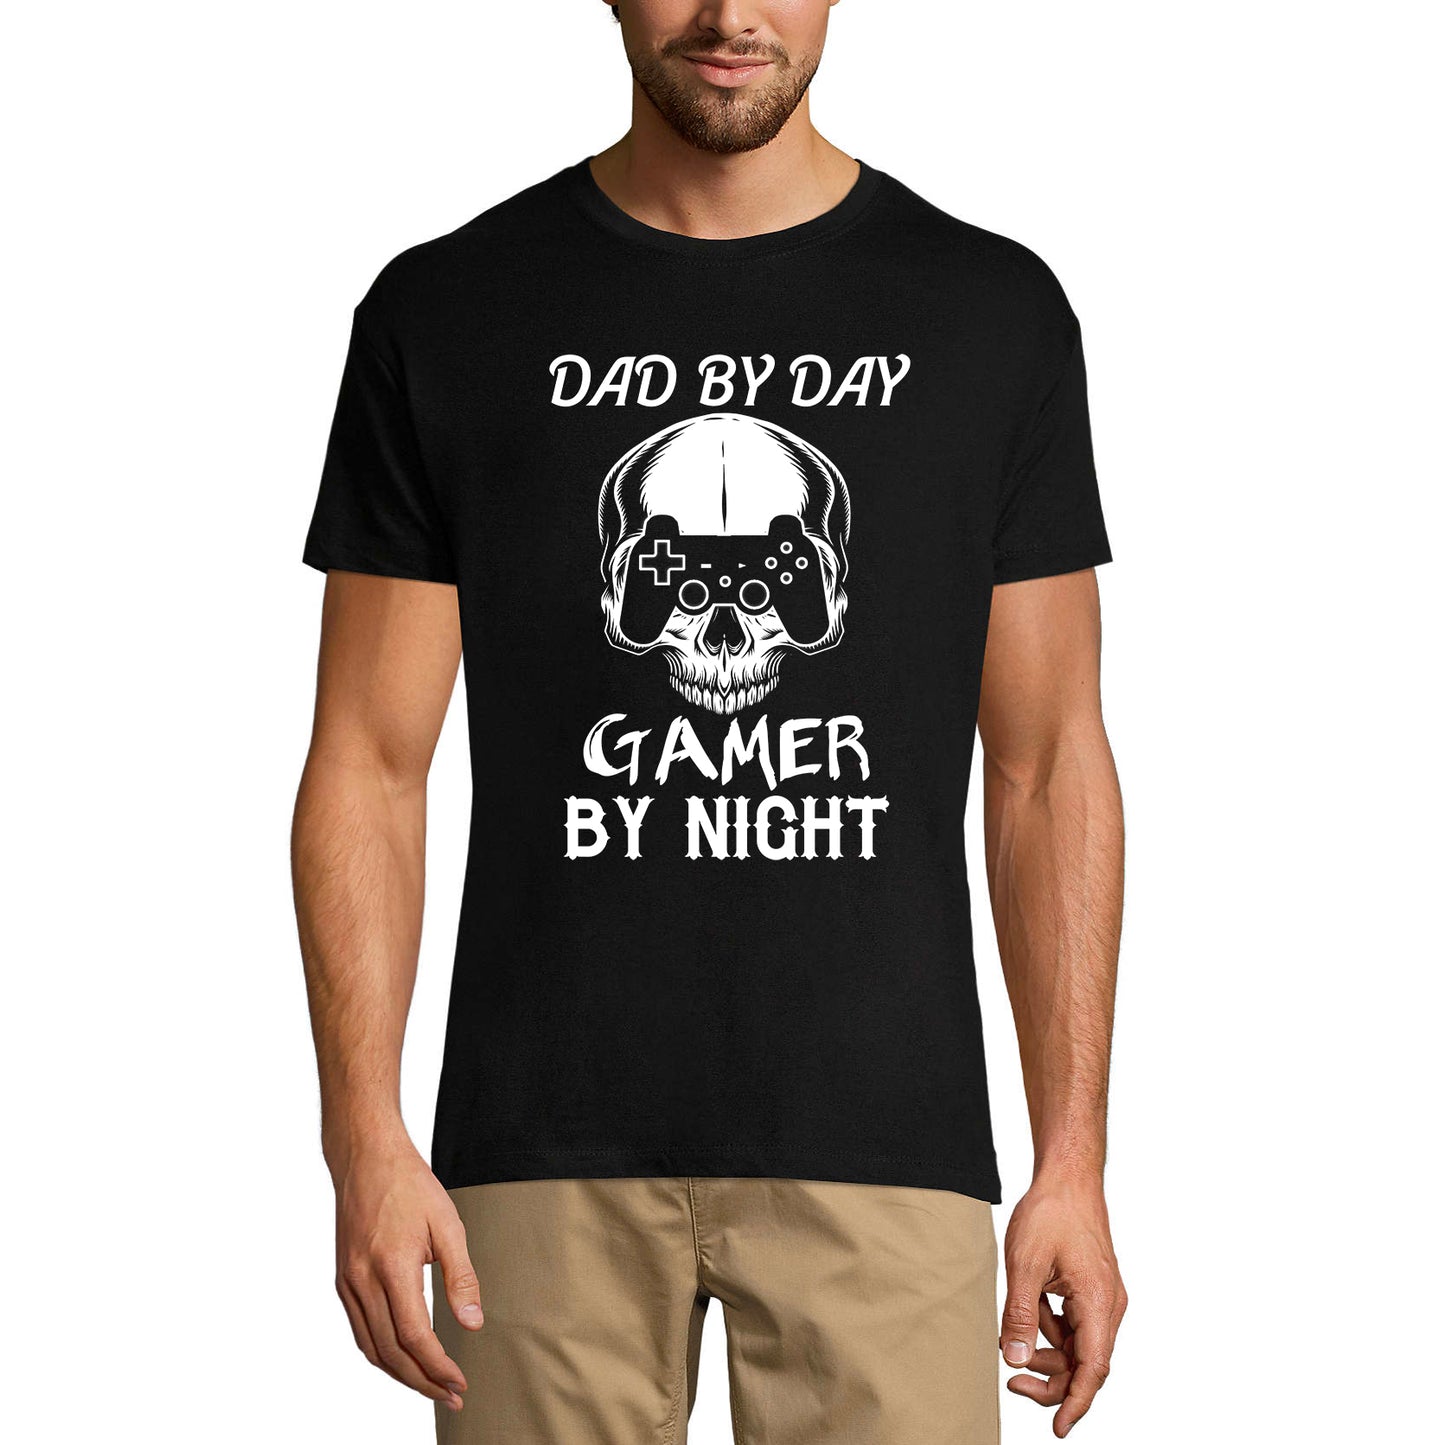 ULTRABASIC Men's Graphic Dad by Day Gamer by Night - Gaming Shirt for Fathers mode on level up dad gamer i paused my game alien player ufo playstation tee shirt clothes gaming apparel gifts super mario nintendo call of duty graphic tshirt video game funny geek gift for the gamer fortnite pubg humor son father birthday